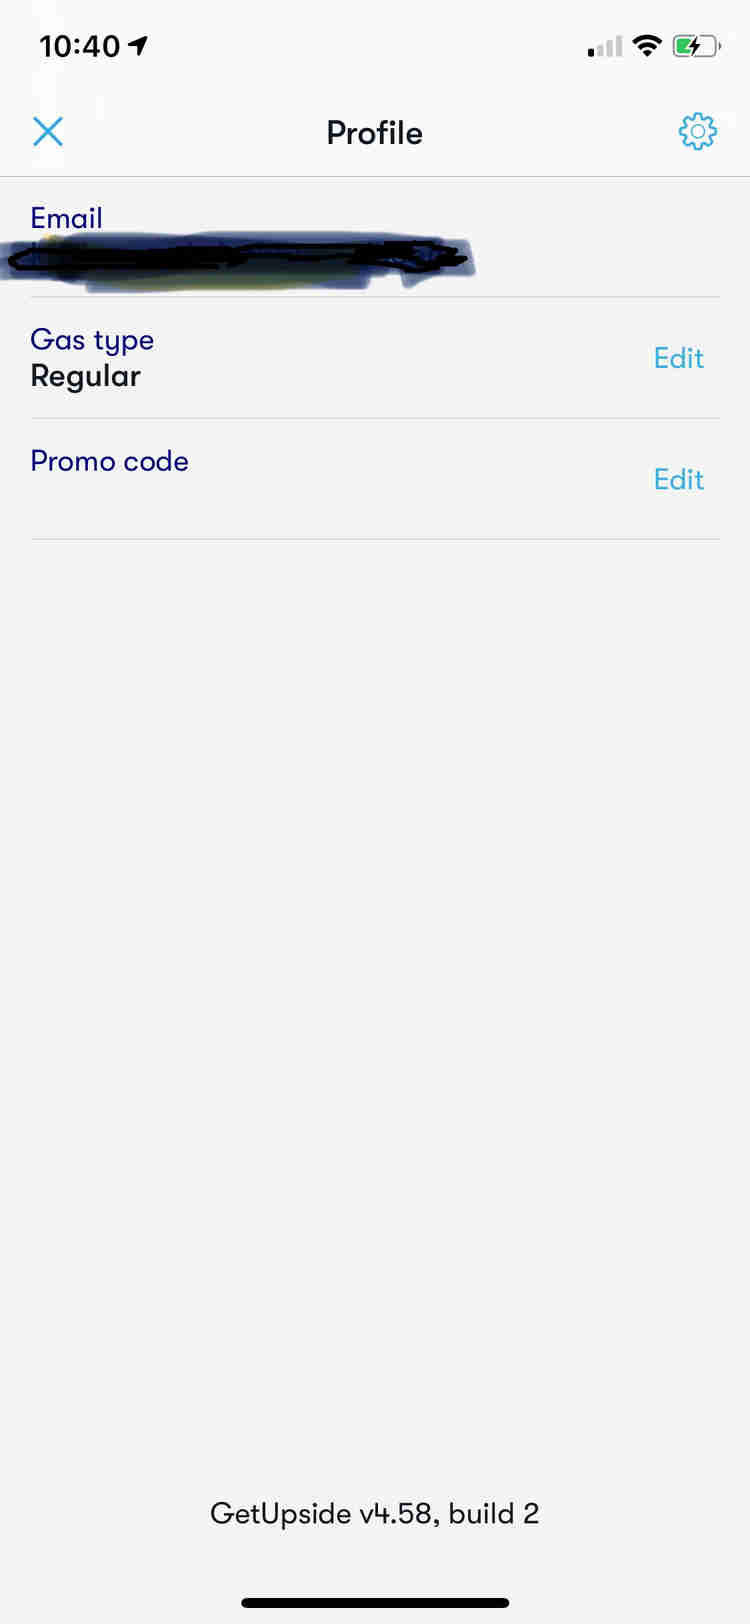 Image showing how to enter the GetUpside promo code in the app